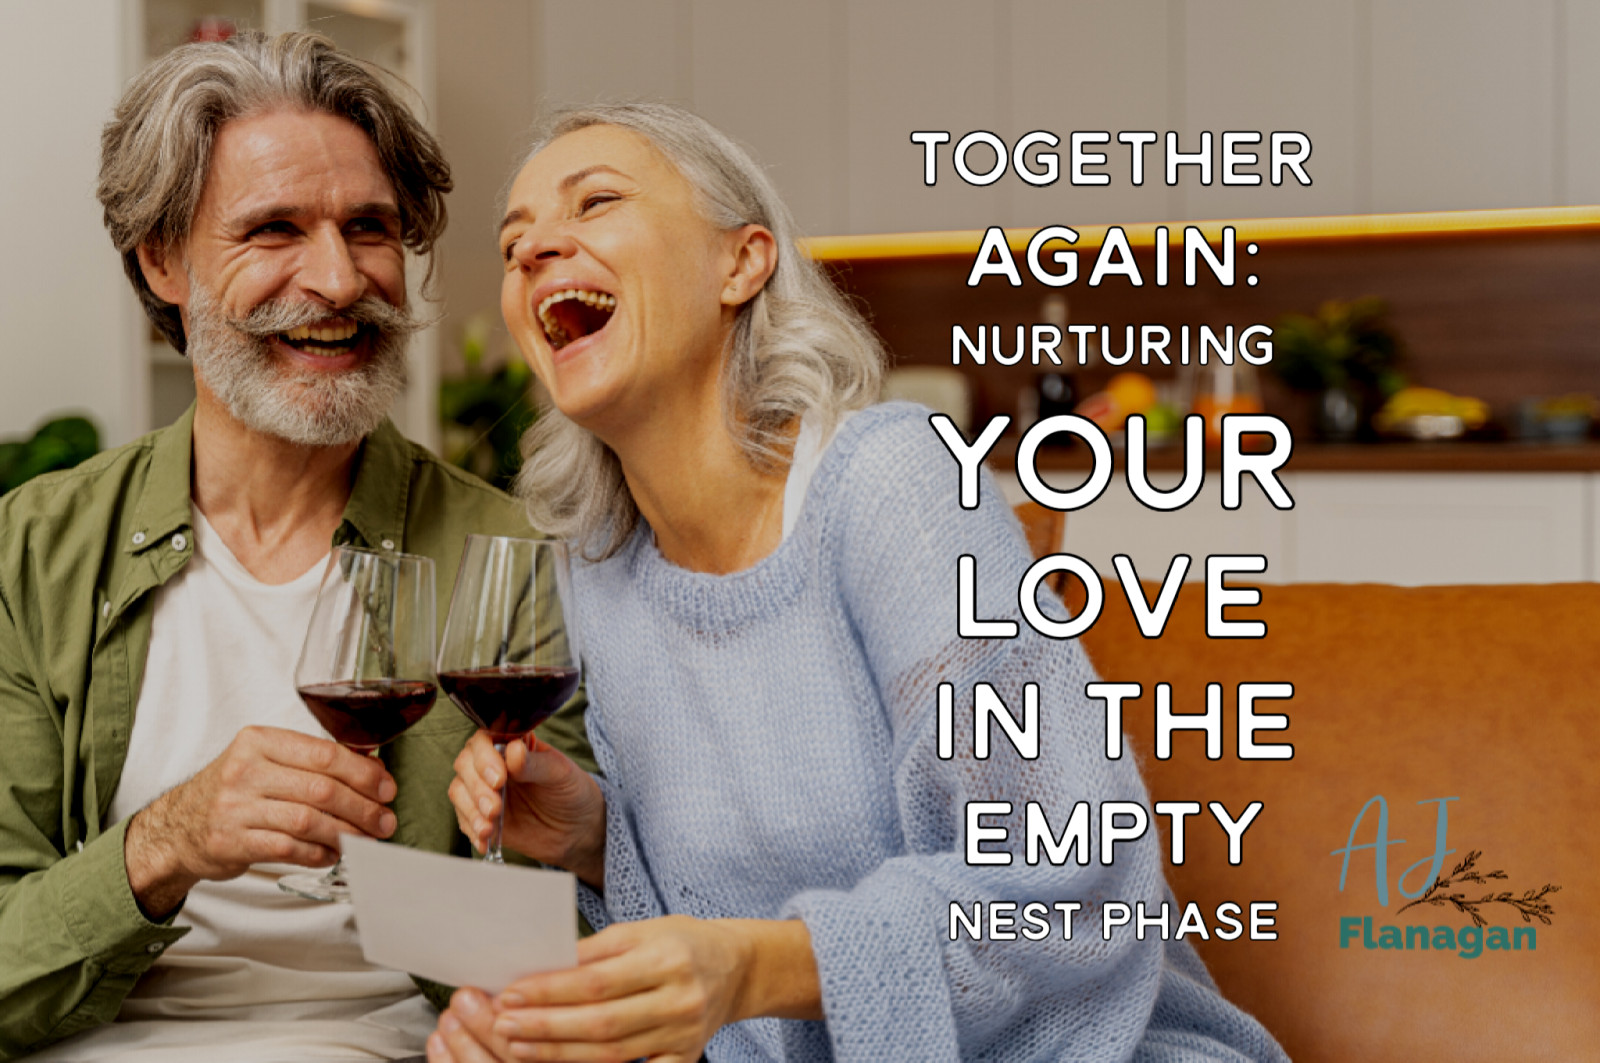 Together Again: Nurturing Your Love in the Empty Nest Phase